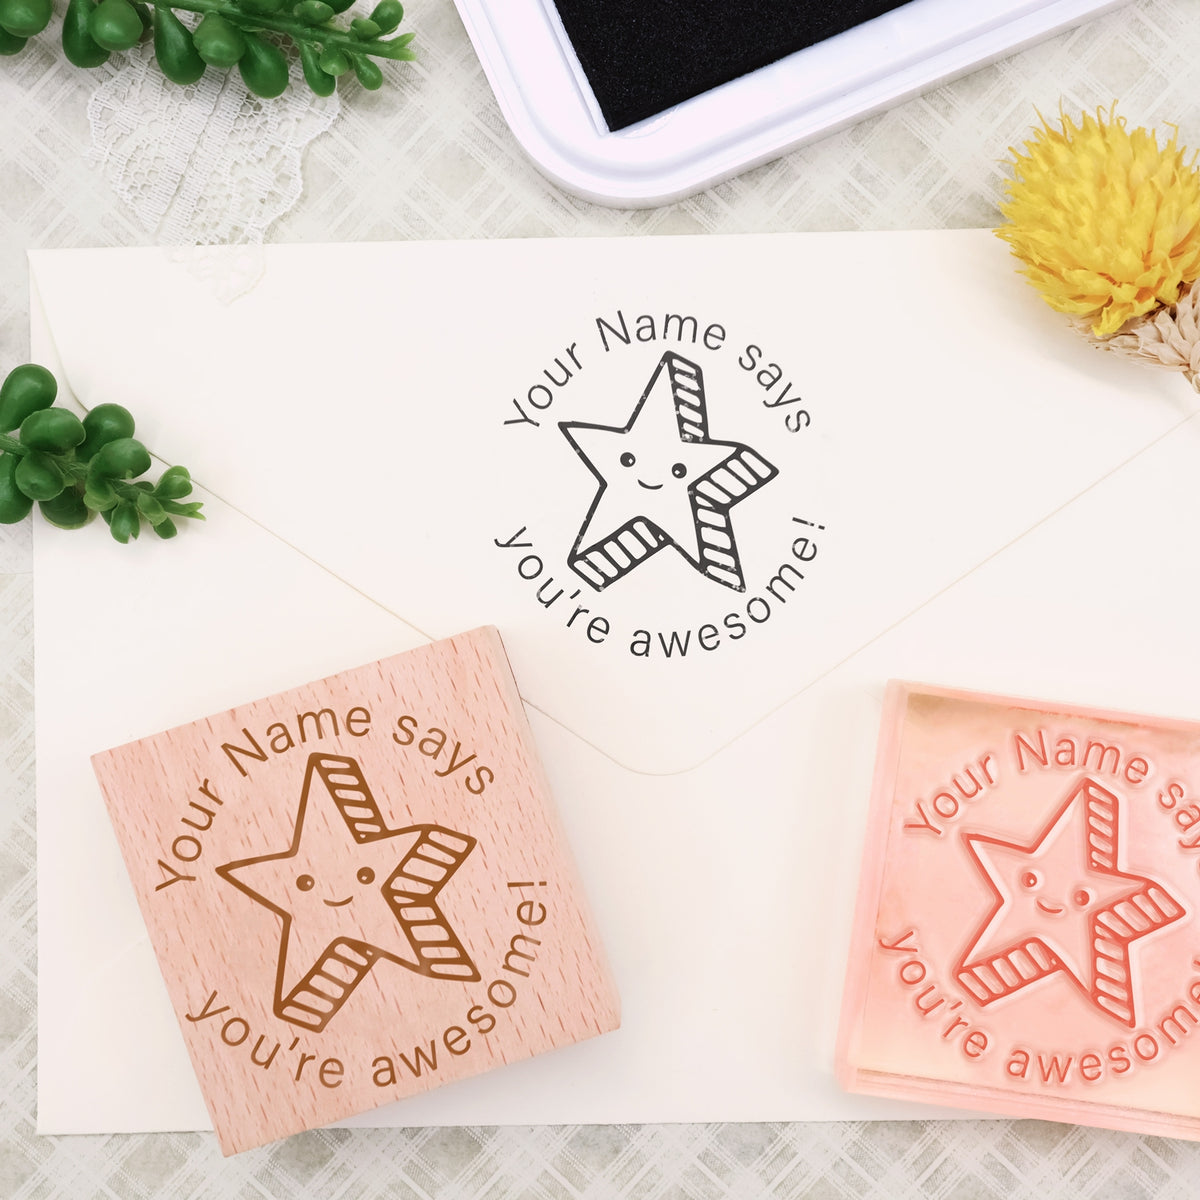 Personalized Rubber Stamp for Boys, Custom Kids Rubber Stamp